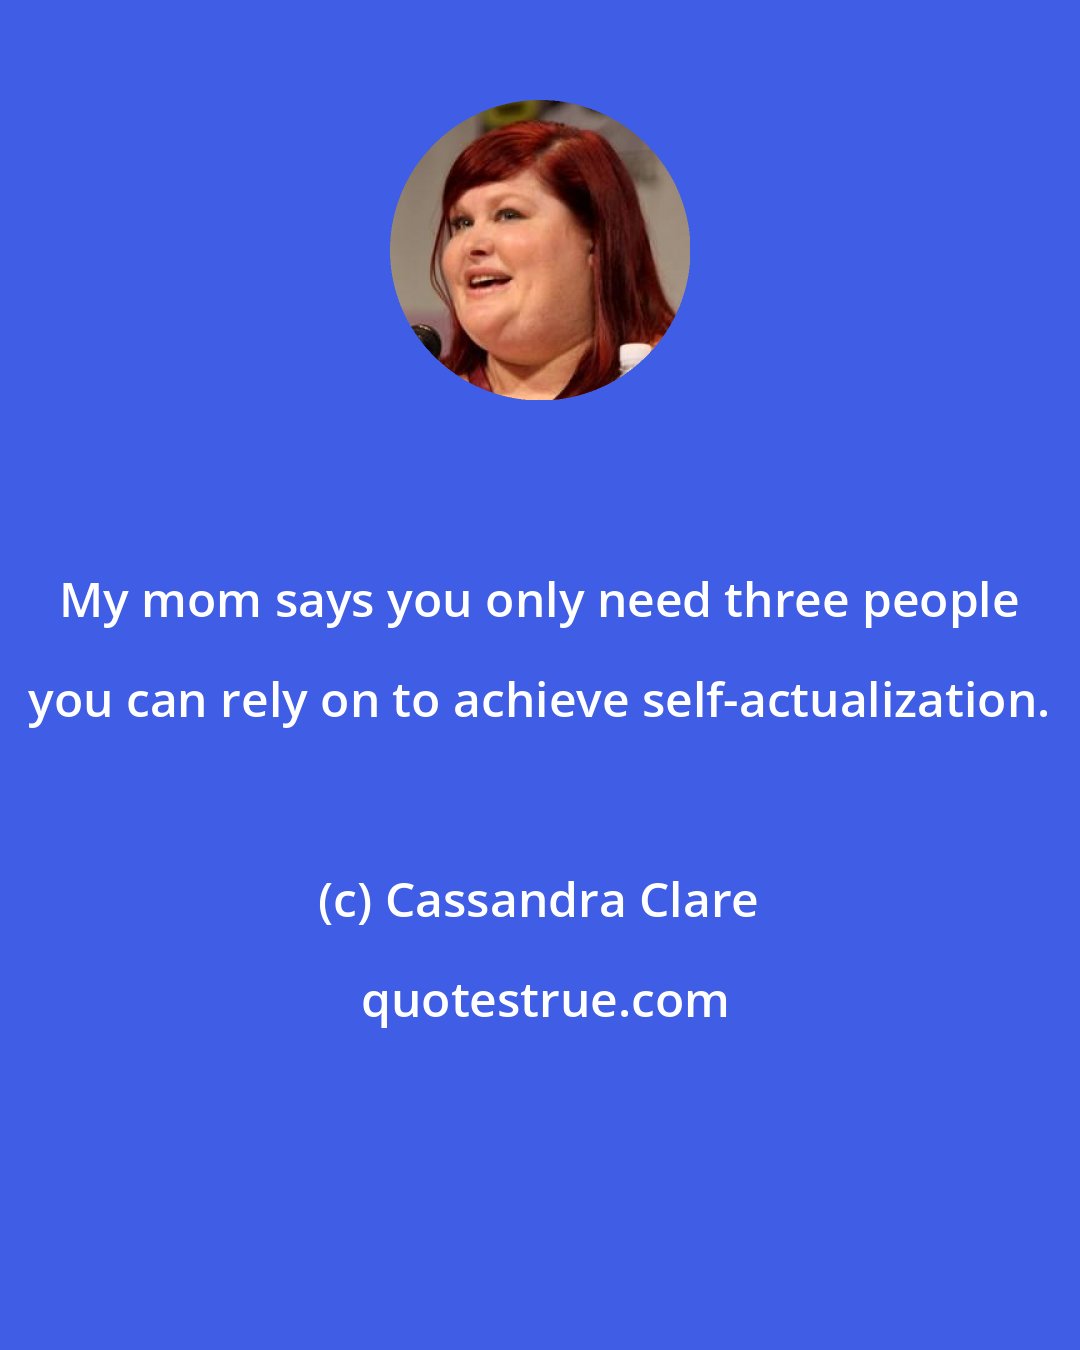 Cassandra Clare: My mom says you only need three people you can rely on to achieve self-actualization.